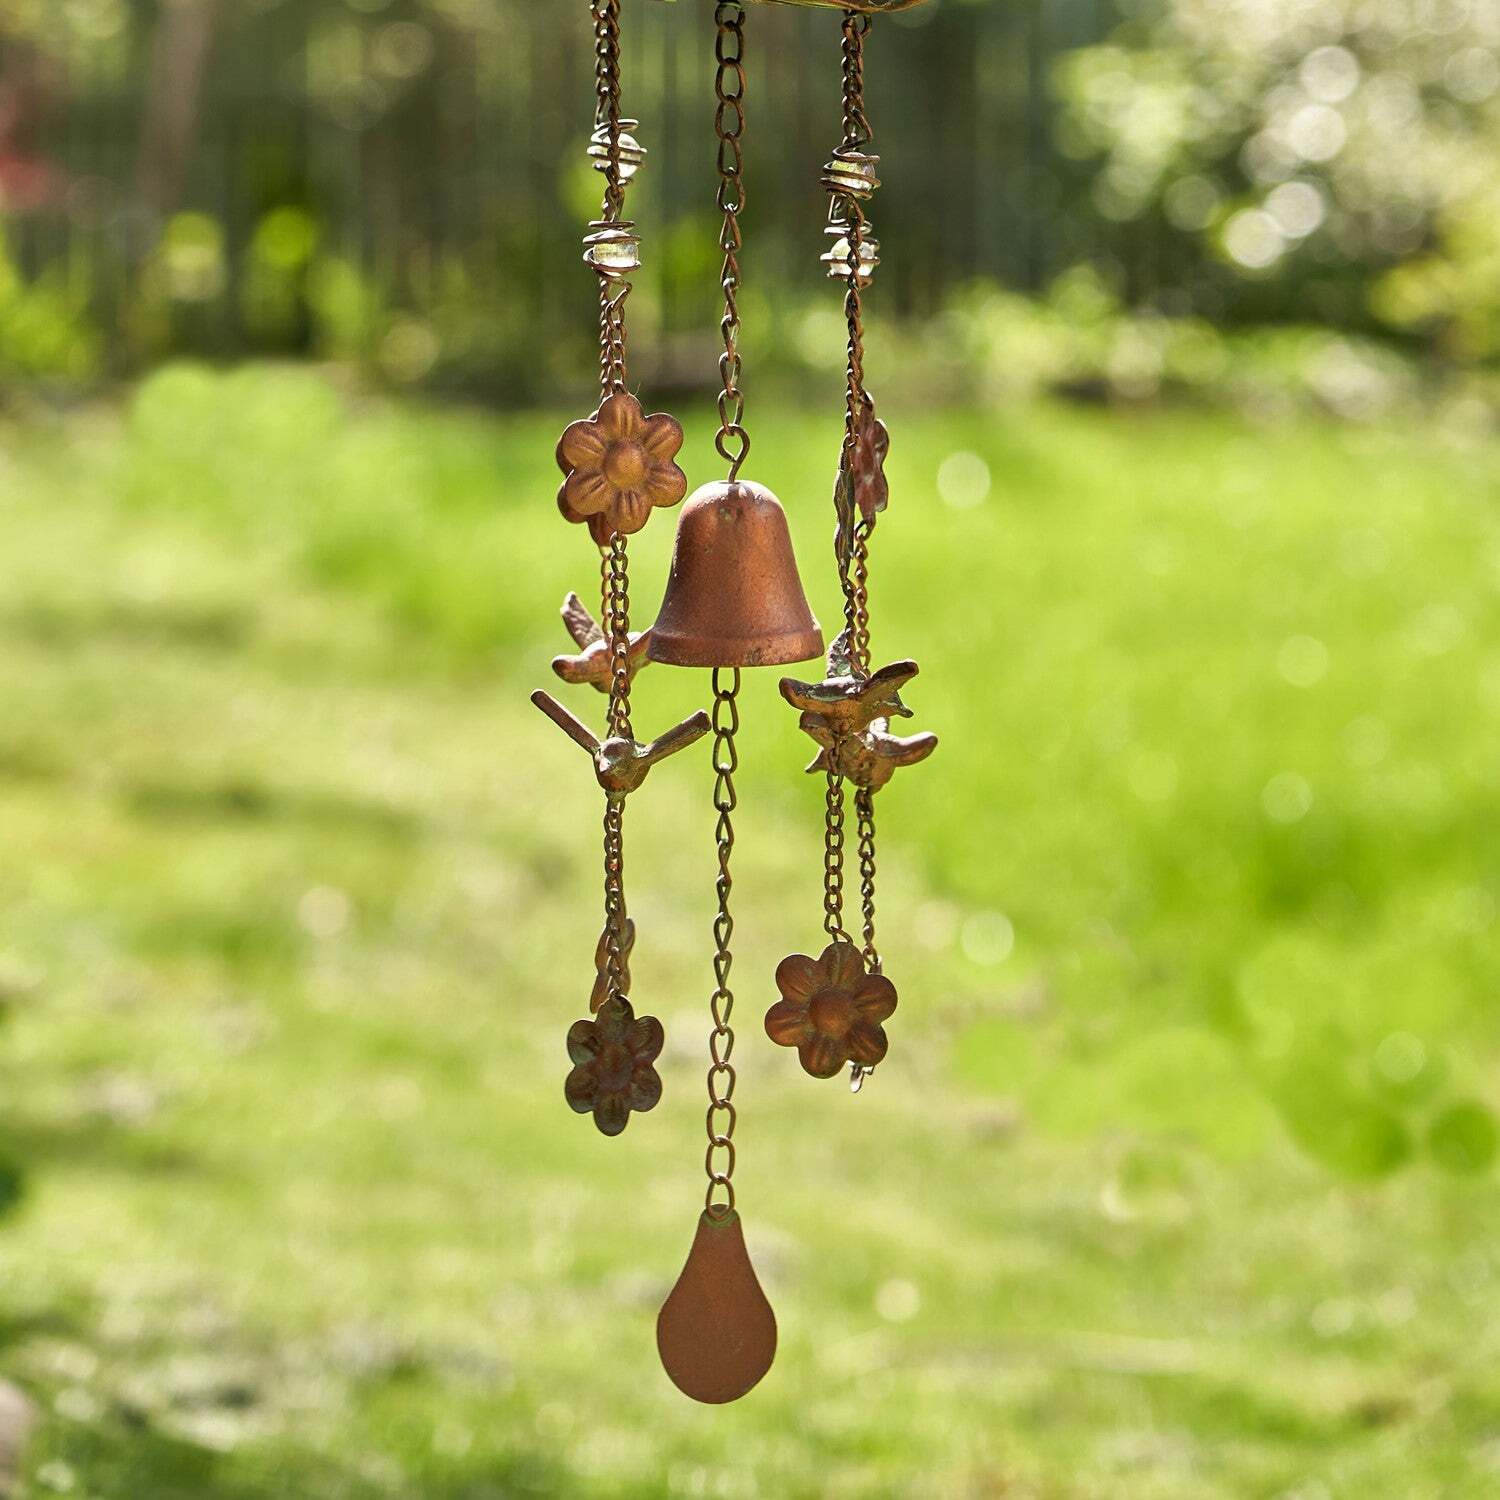 Antique Copper Hanging Birdhouse Wind Chime 